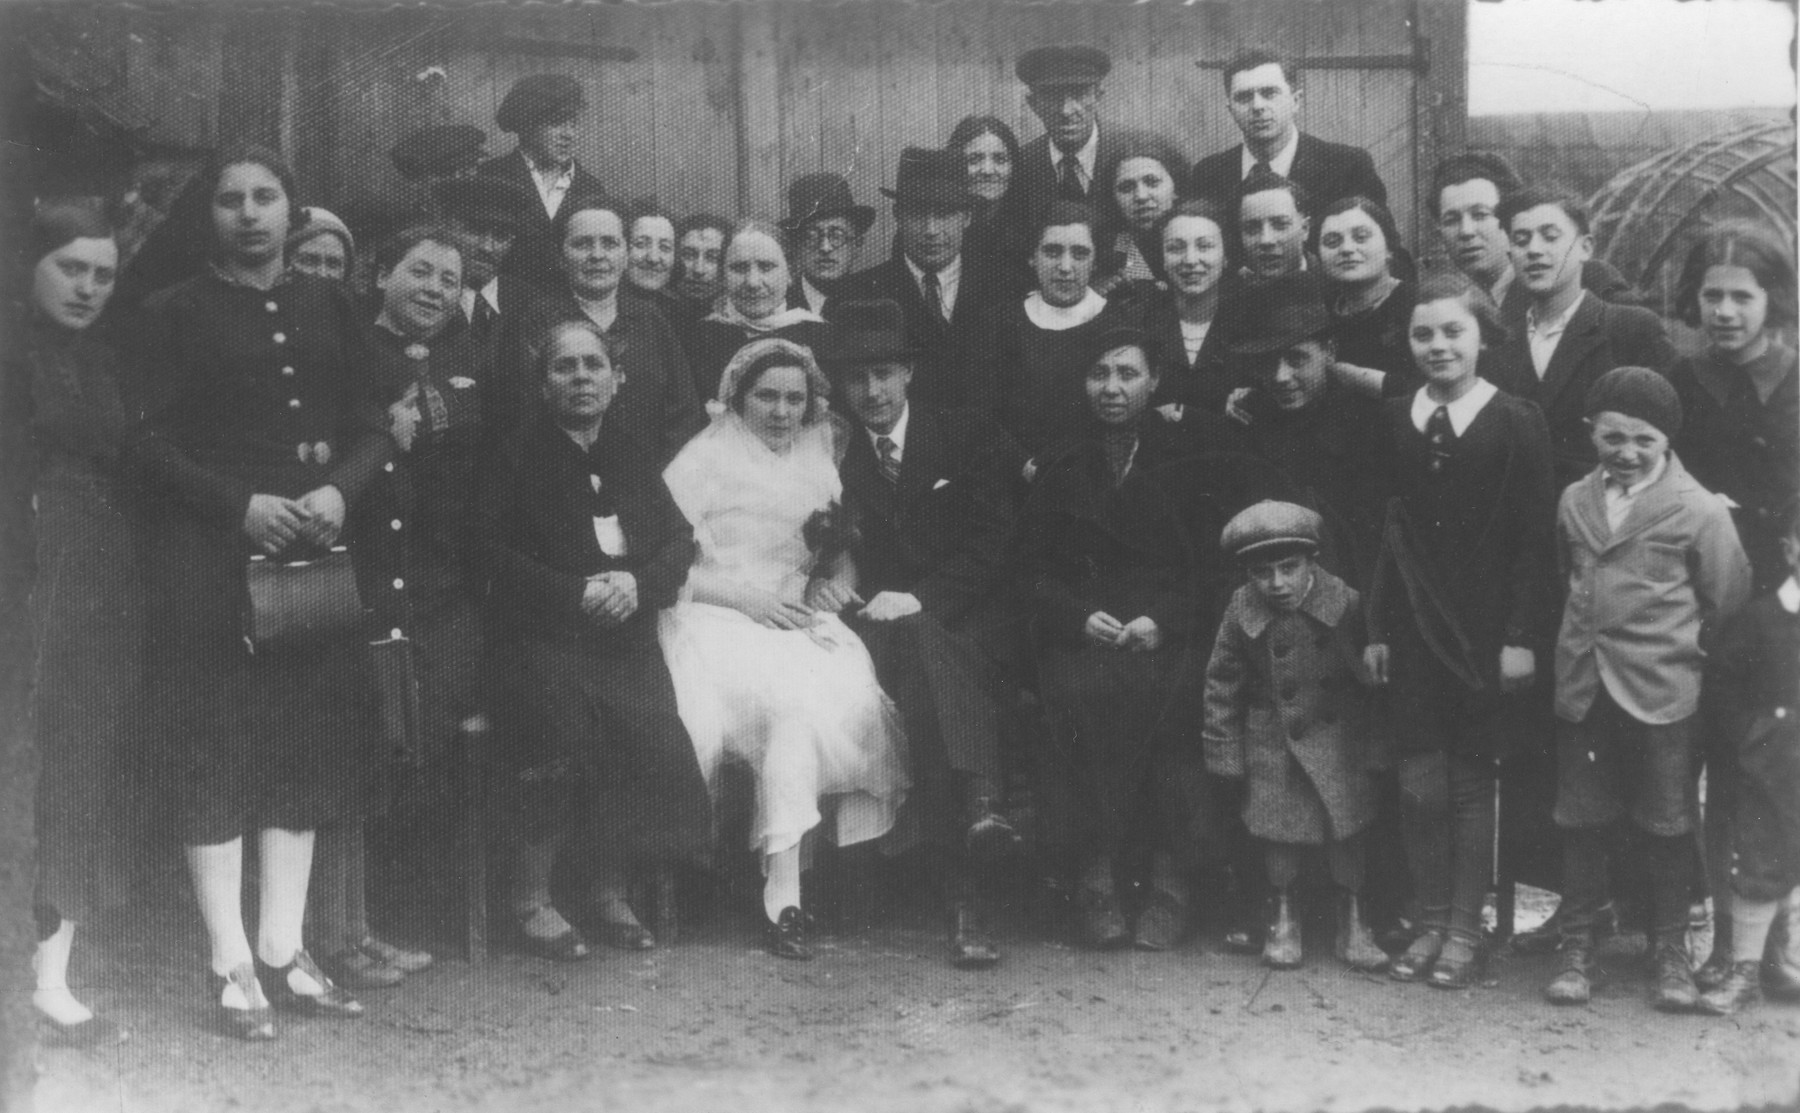 Family and friends pose with the bride and groom at a Jewish wedding in Telsiai, Lithuania.

The couple perished during World War II.